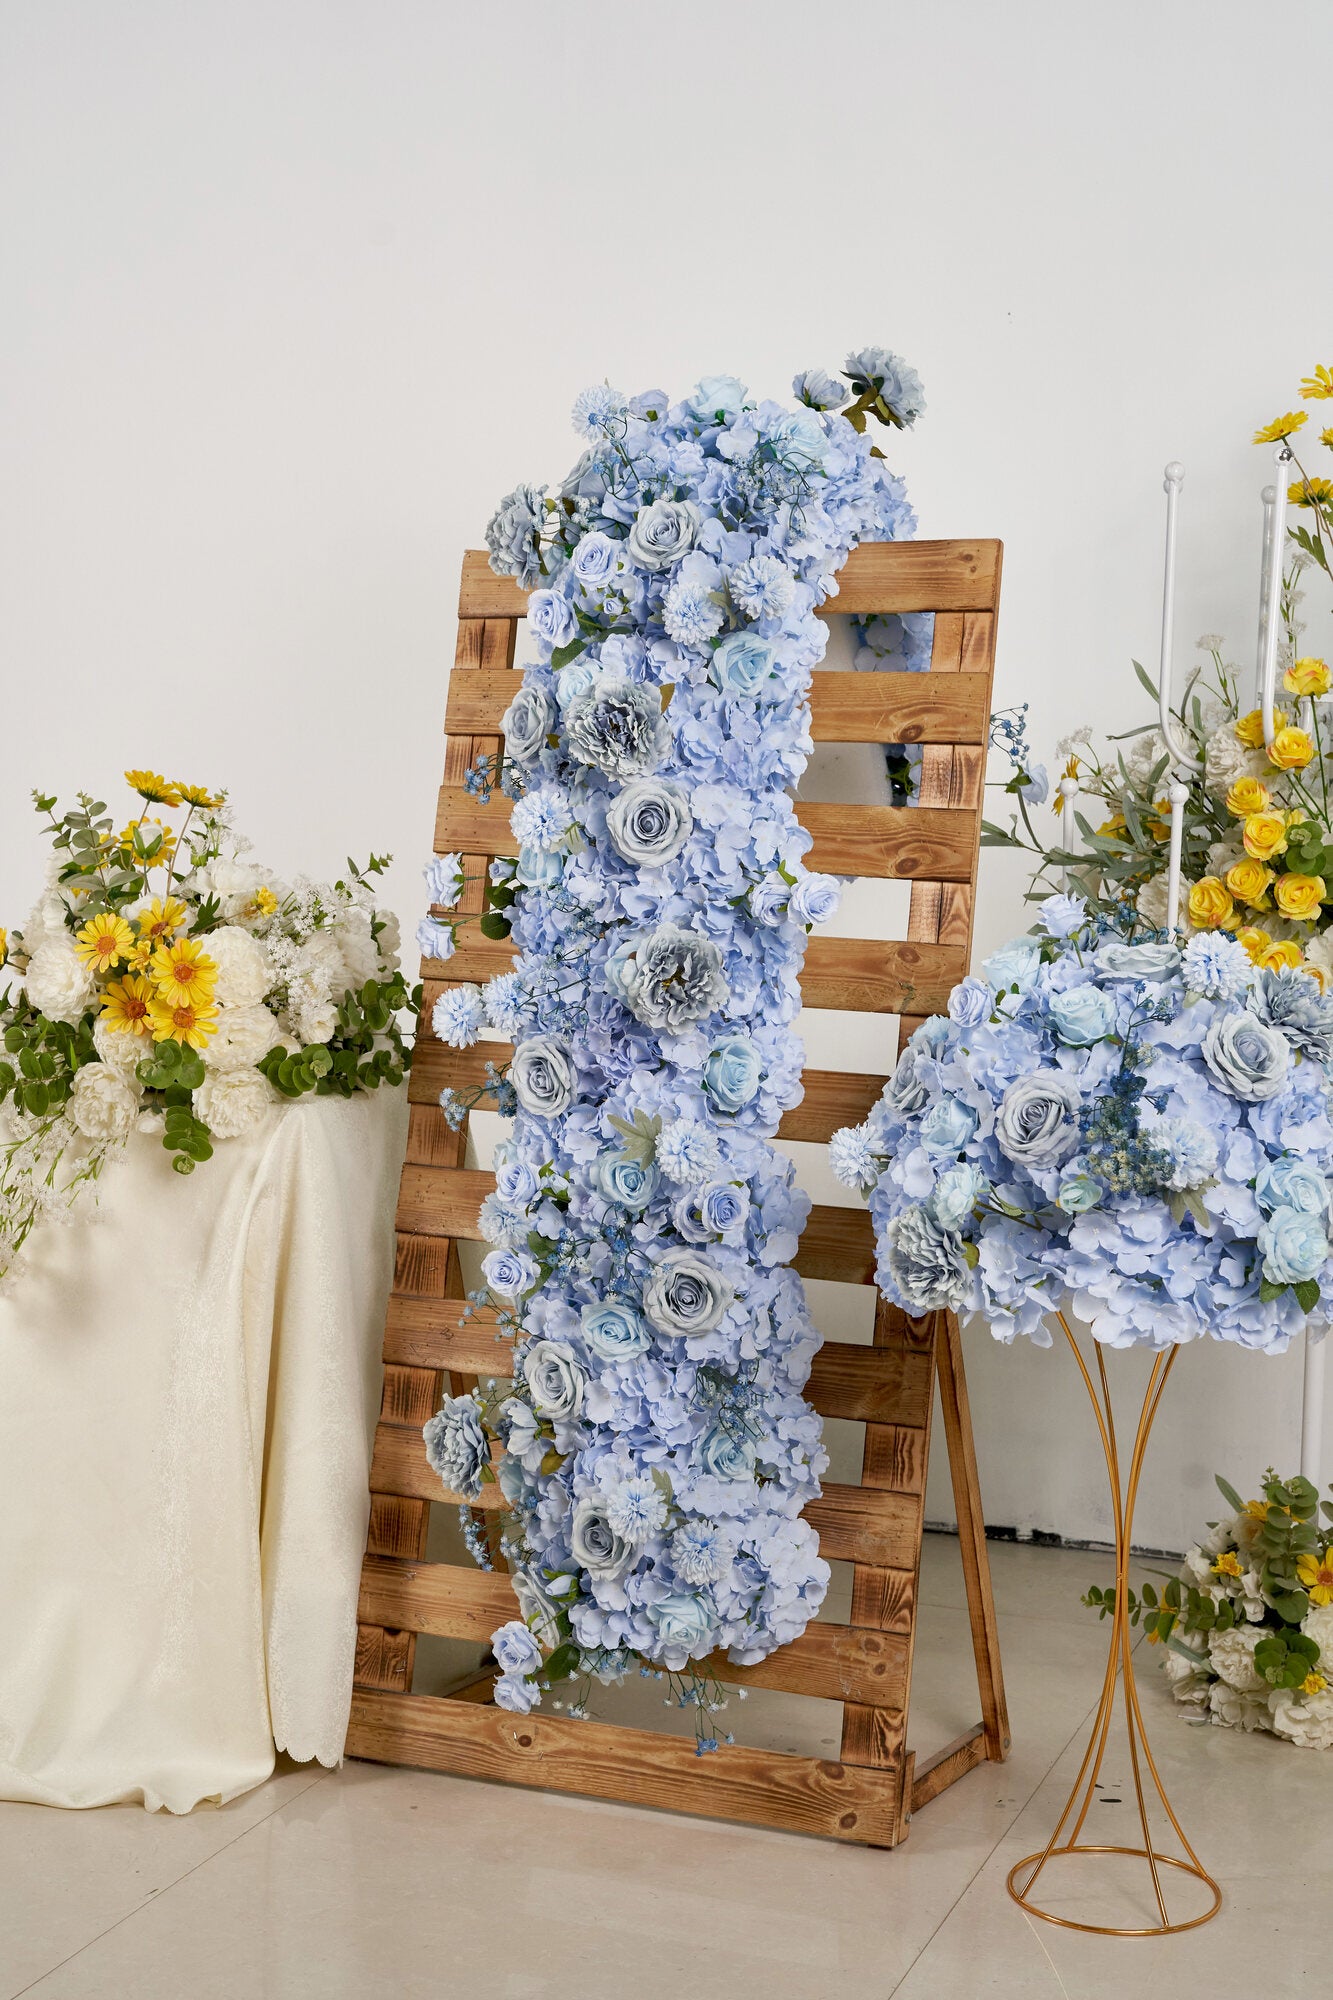 Blue Runner Long Row of Flowers Wedding Arch Floral Background Wall Decoration Proposal Decor